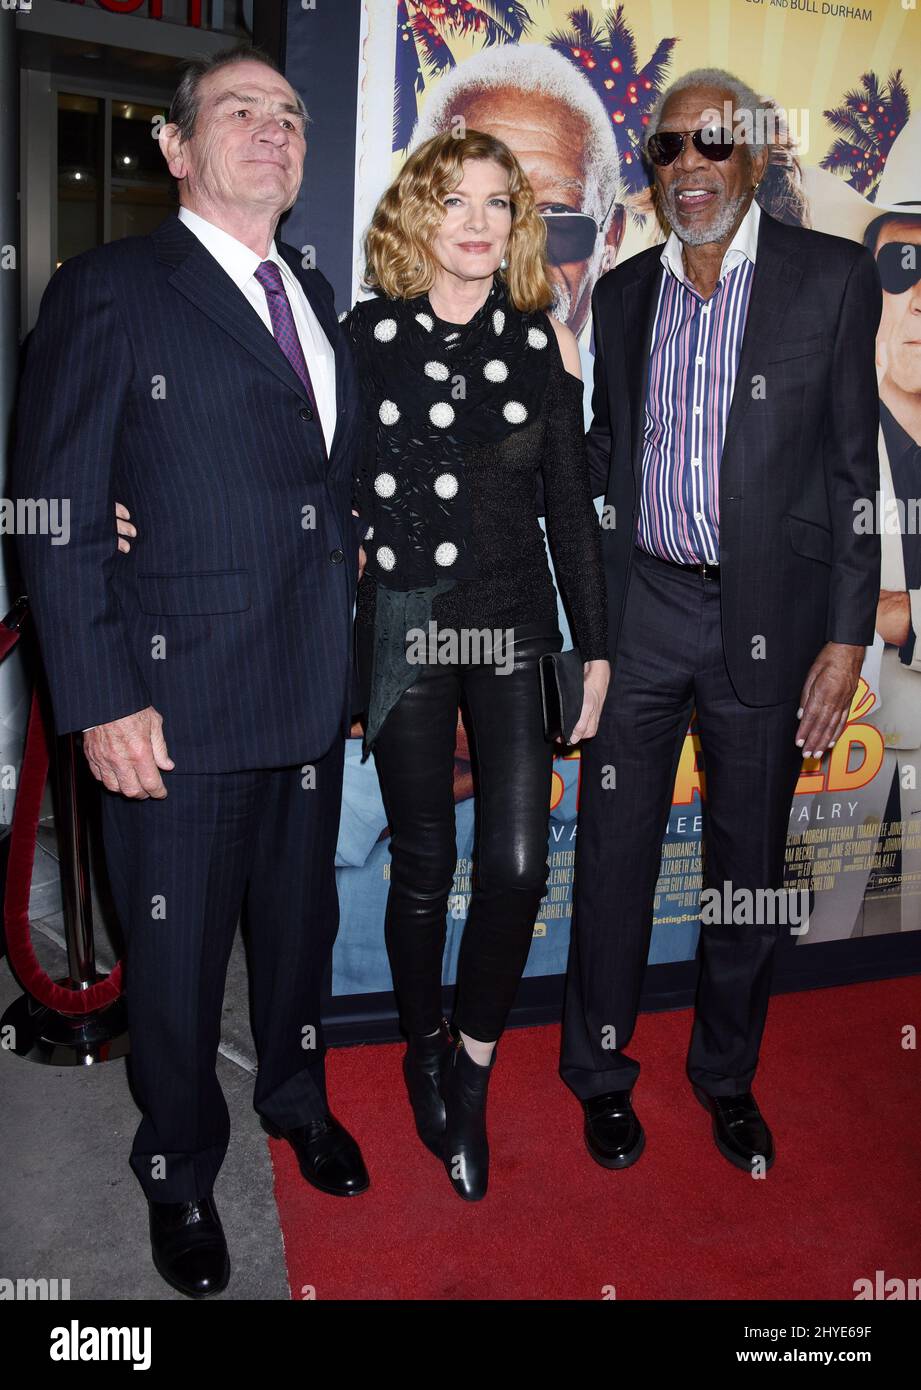 https://c8.alamy.com/comp/2HYE69F/tommy-lee-jones-rene-russo-and-morgan-freeman-attending-premiere-of-just-getting-started-in-los-angeles-california-2HYE69F.jpg